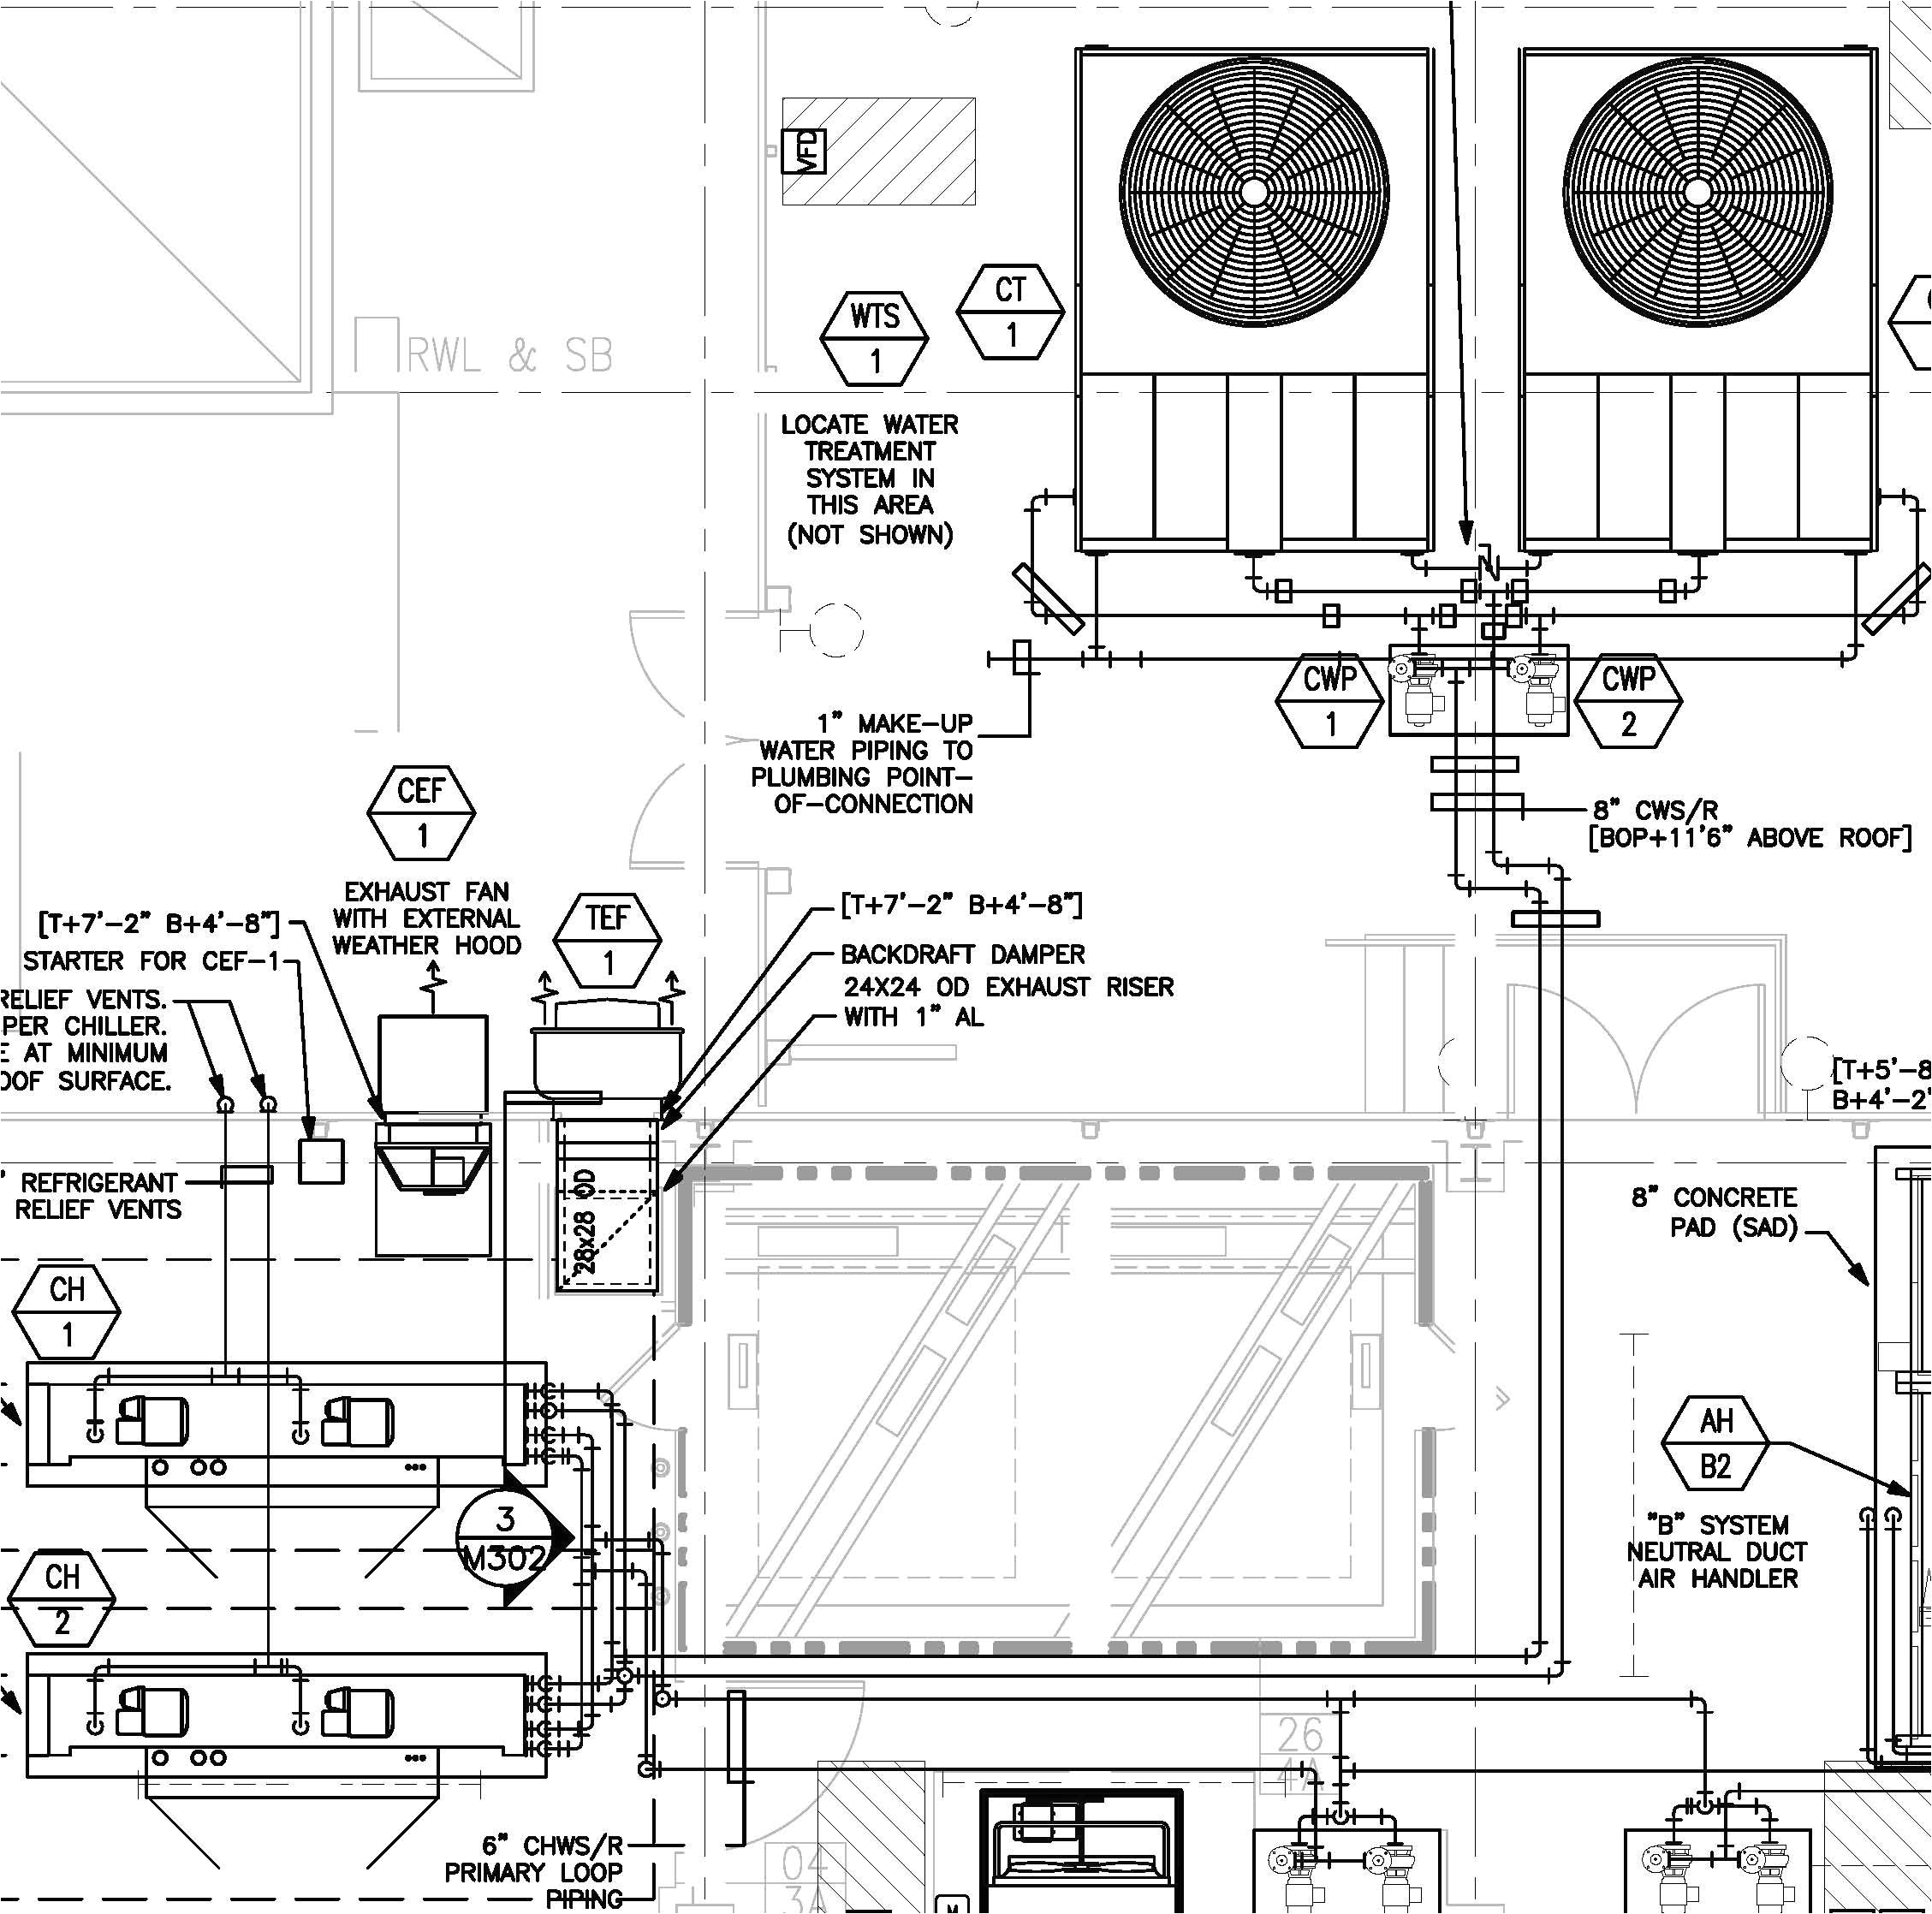 Wiring Diagram Heating Systems American Standard Heating and Cooling Systems Connection Schematics